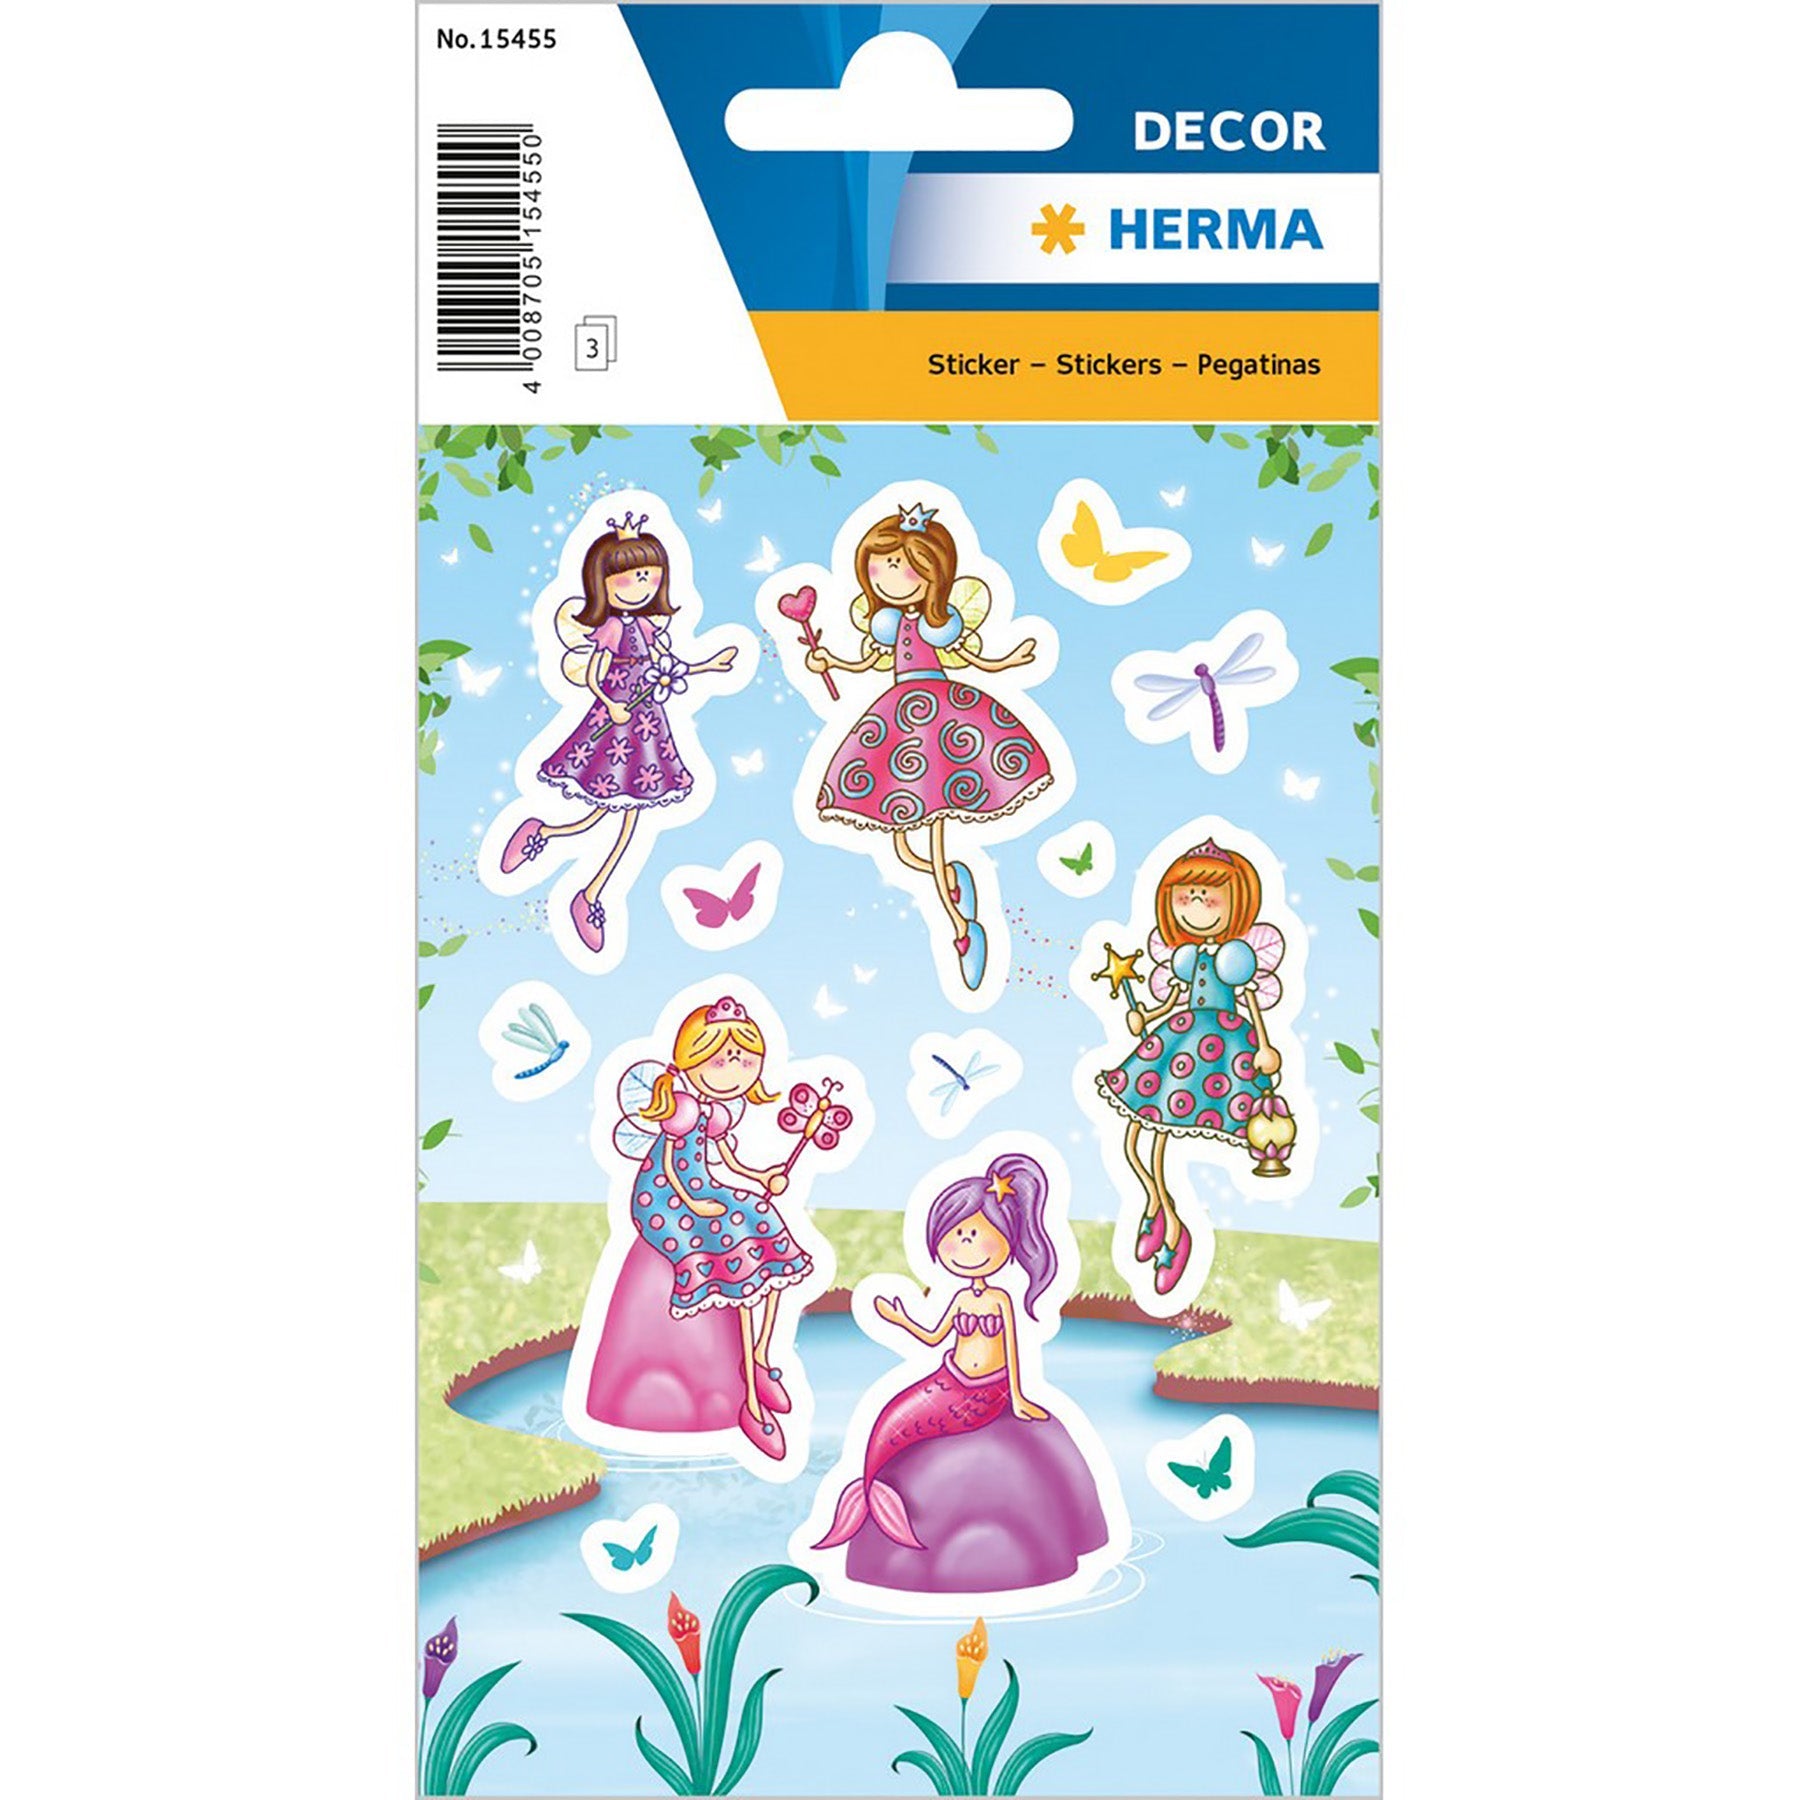 Herma Décor 3 Sheets Stickers Mermaid 4.75x3.1in Sheet